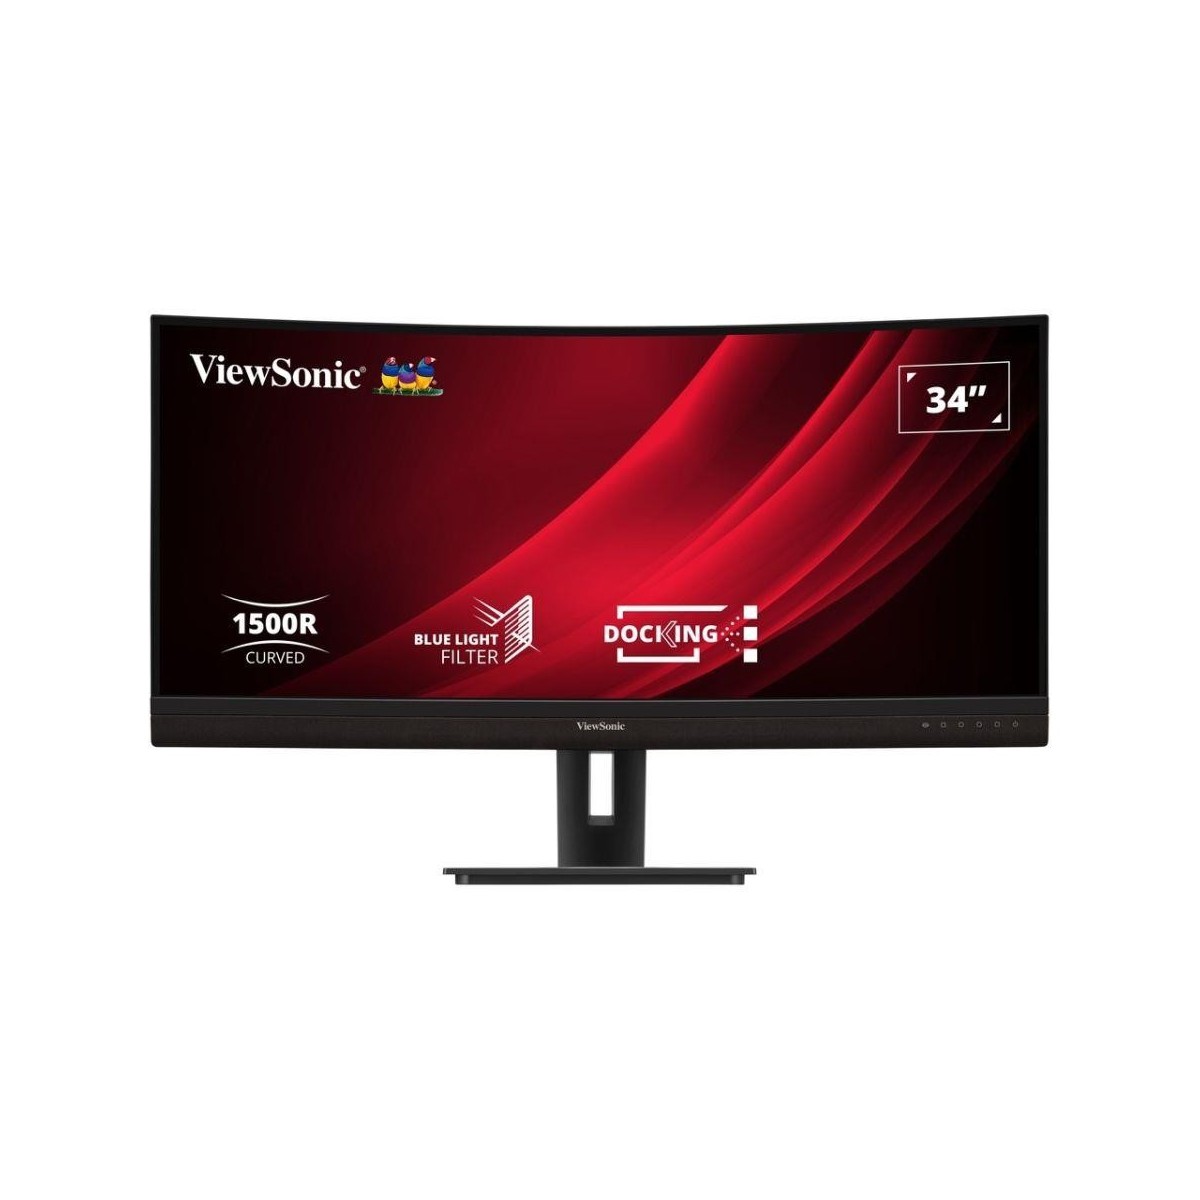 ViewSonic LED monitor - QHD 34 inch curved 21 9 - 400 nits - 5ms incl 2x5W speakers 100Hz - 34